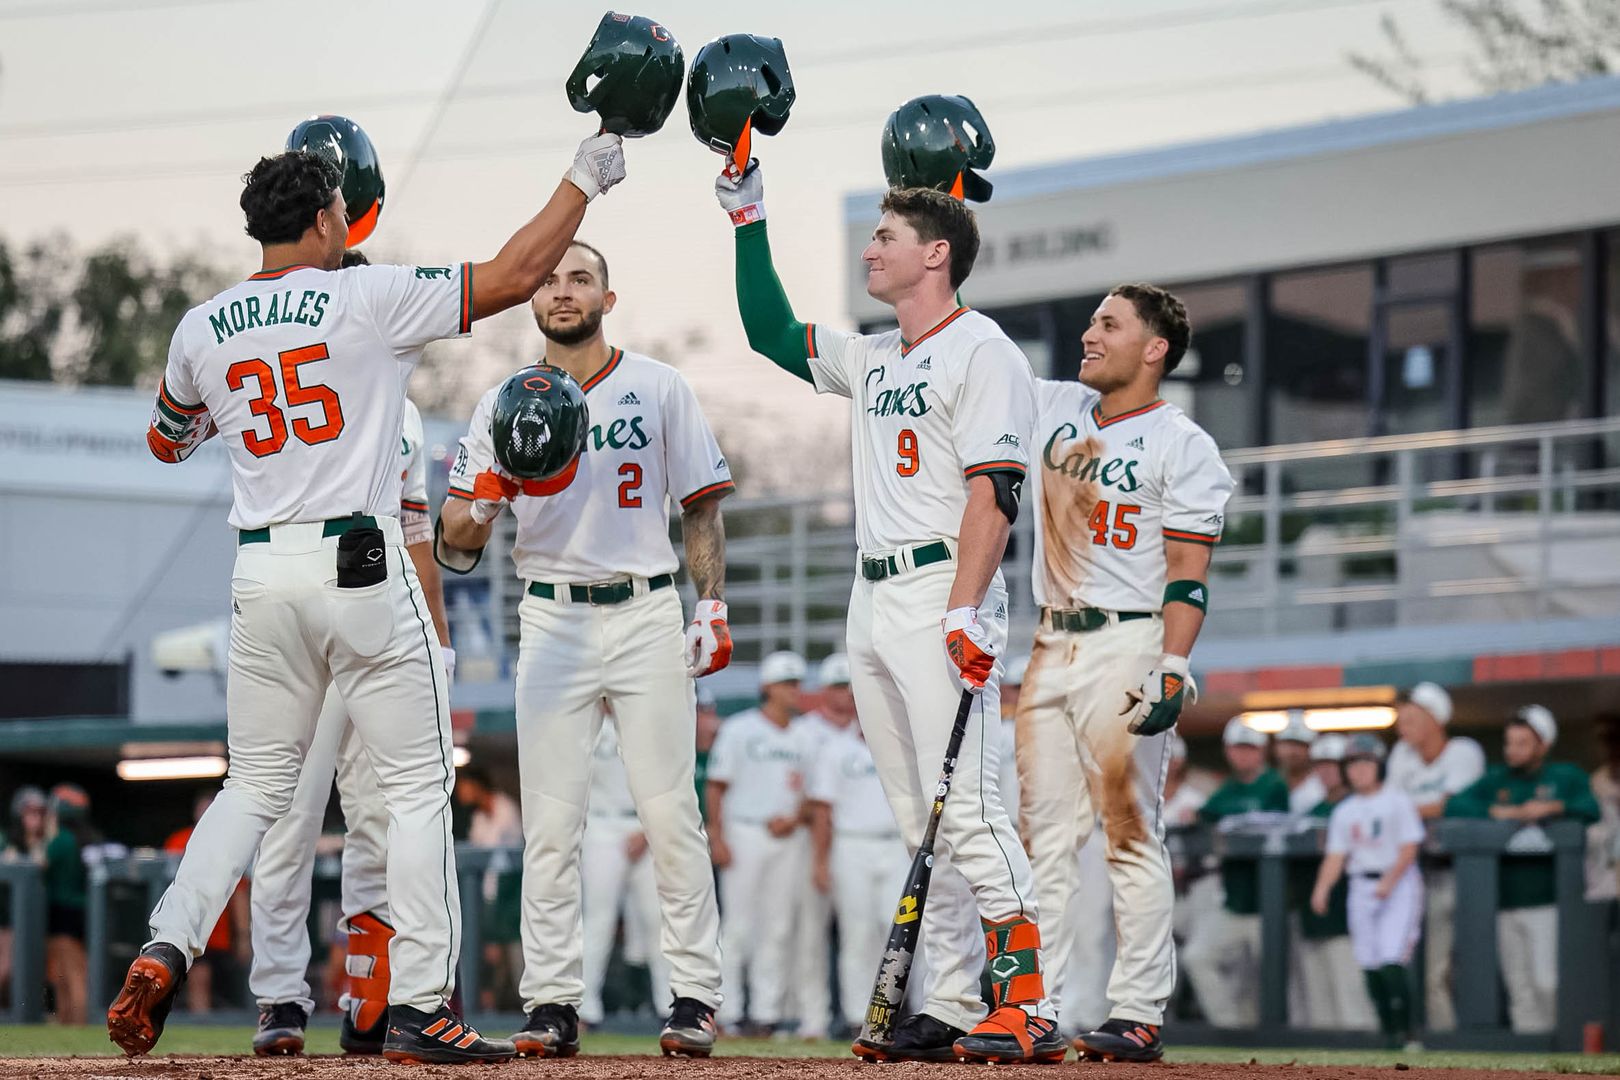 22nd-ranked Hurricanes Hammer Hatters, 11-2